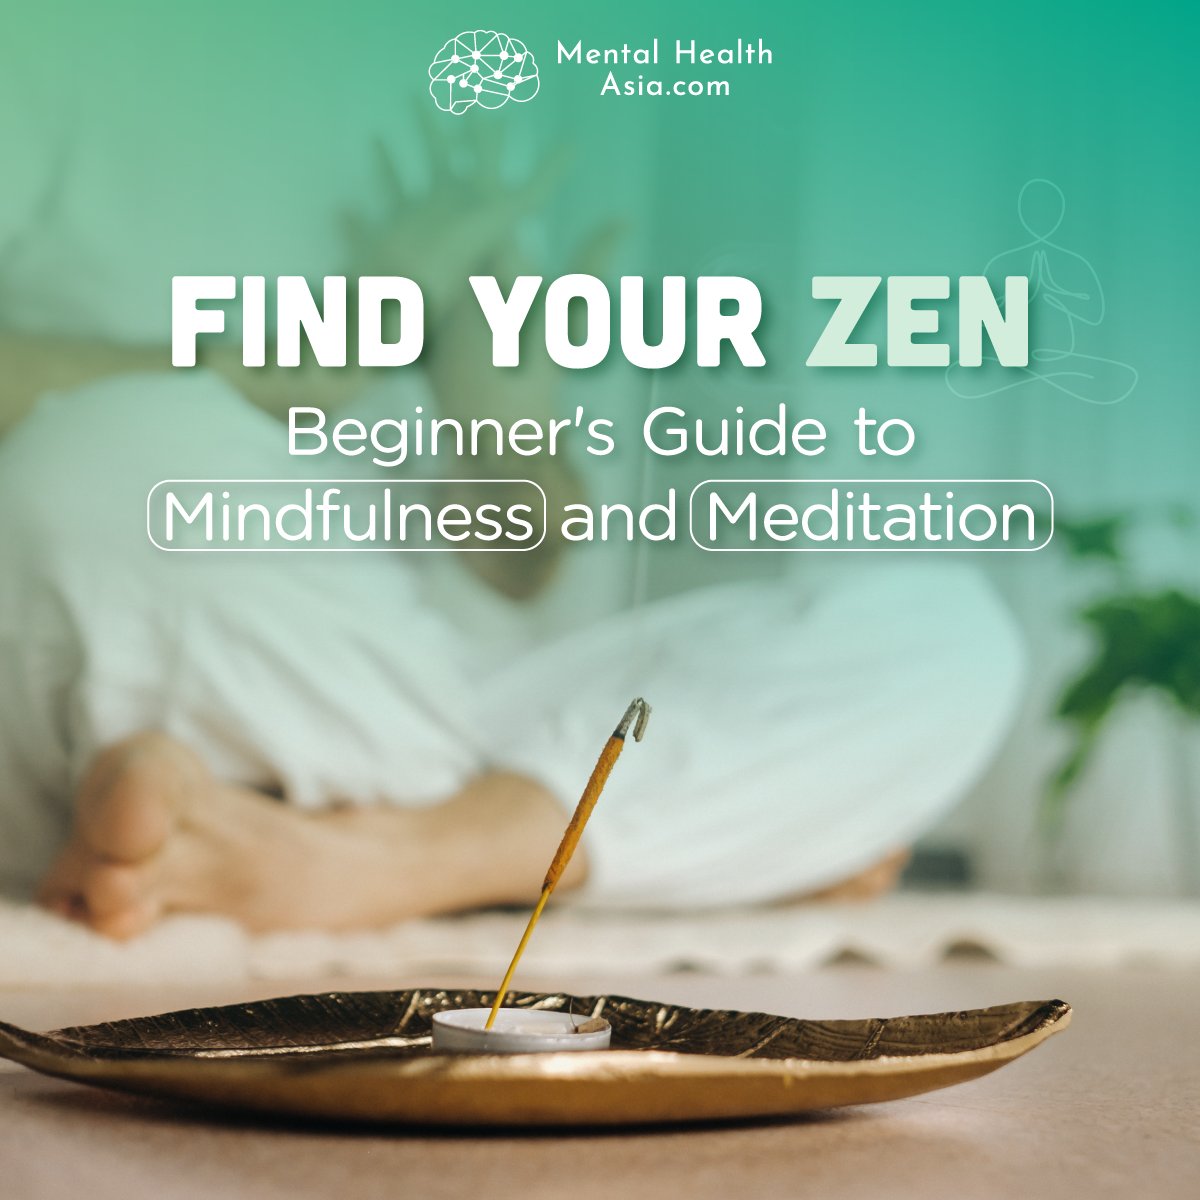 Embark on your Zen journey! 🌿✨ Explore the Beginner's Guide to Mindfulness & Meditation. Discover simple techniques for inner peace. #MindfulnessJourney #MeditationForBeginners 🧘‍♀️💬 Share your goals or experiences below; let's support each other's serenity!